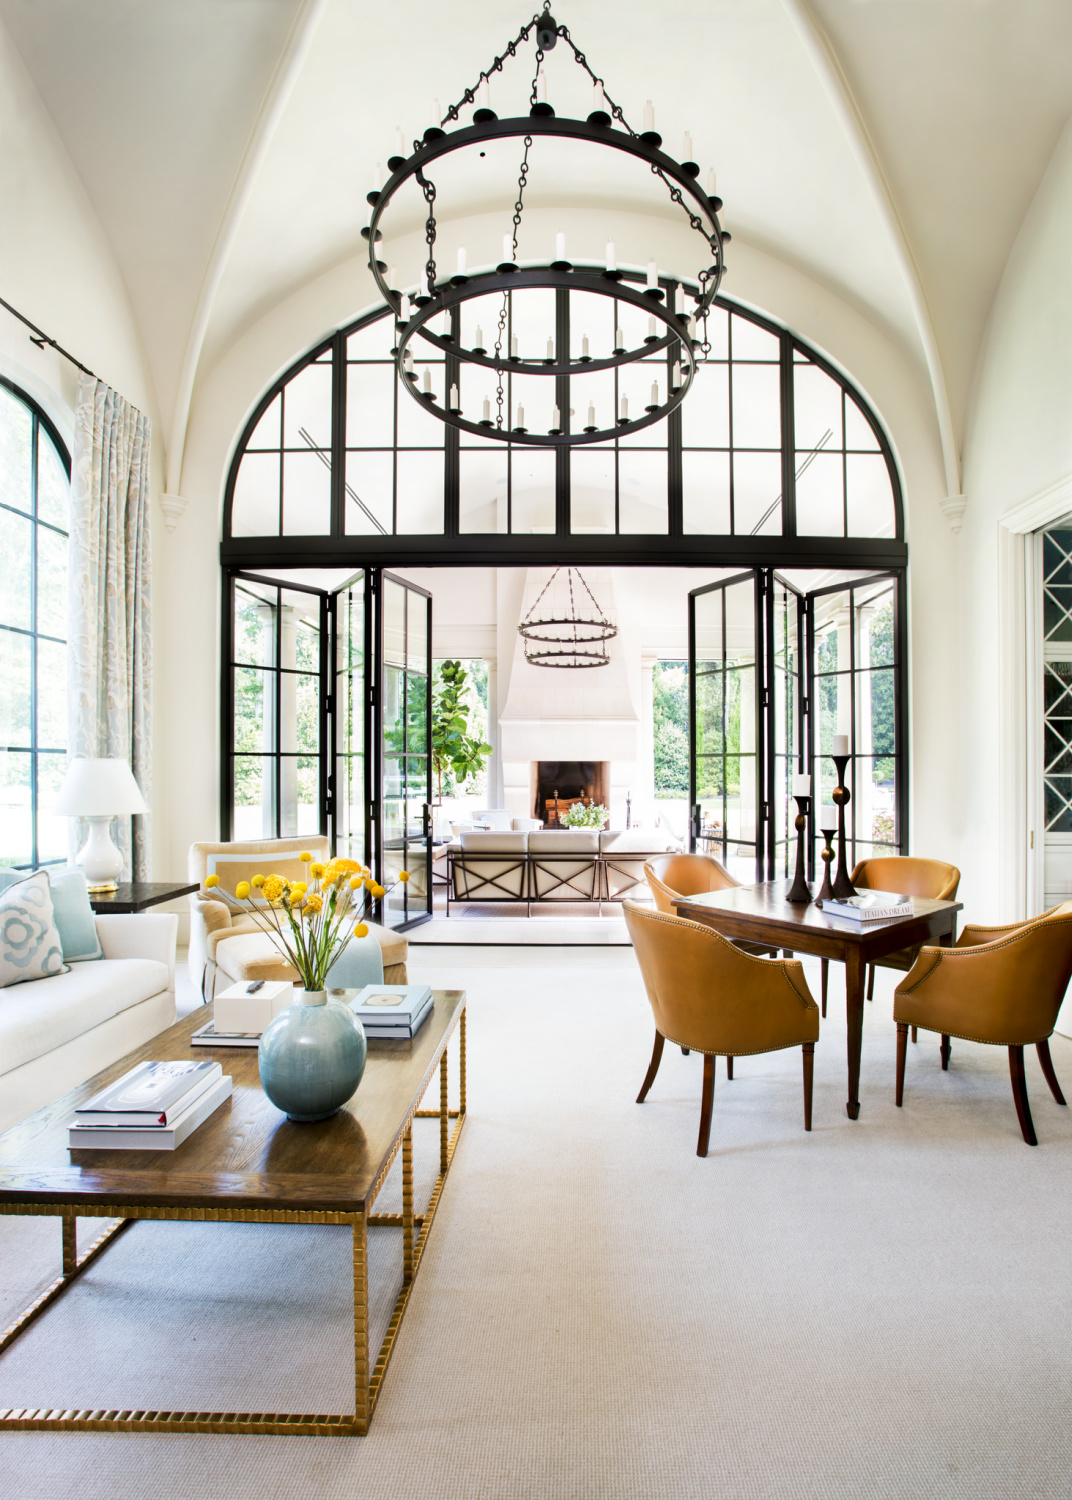 Sophisticated and classic interior designed by Suzanne Kasler in EDITED STYLE (Rizzoli, 2022).